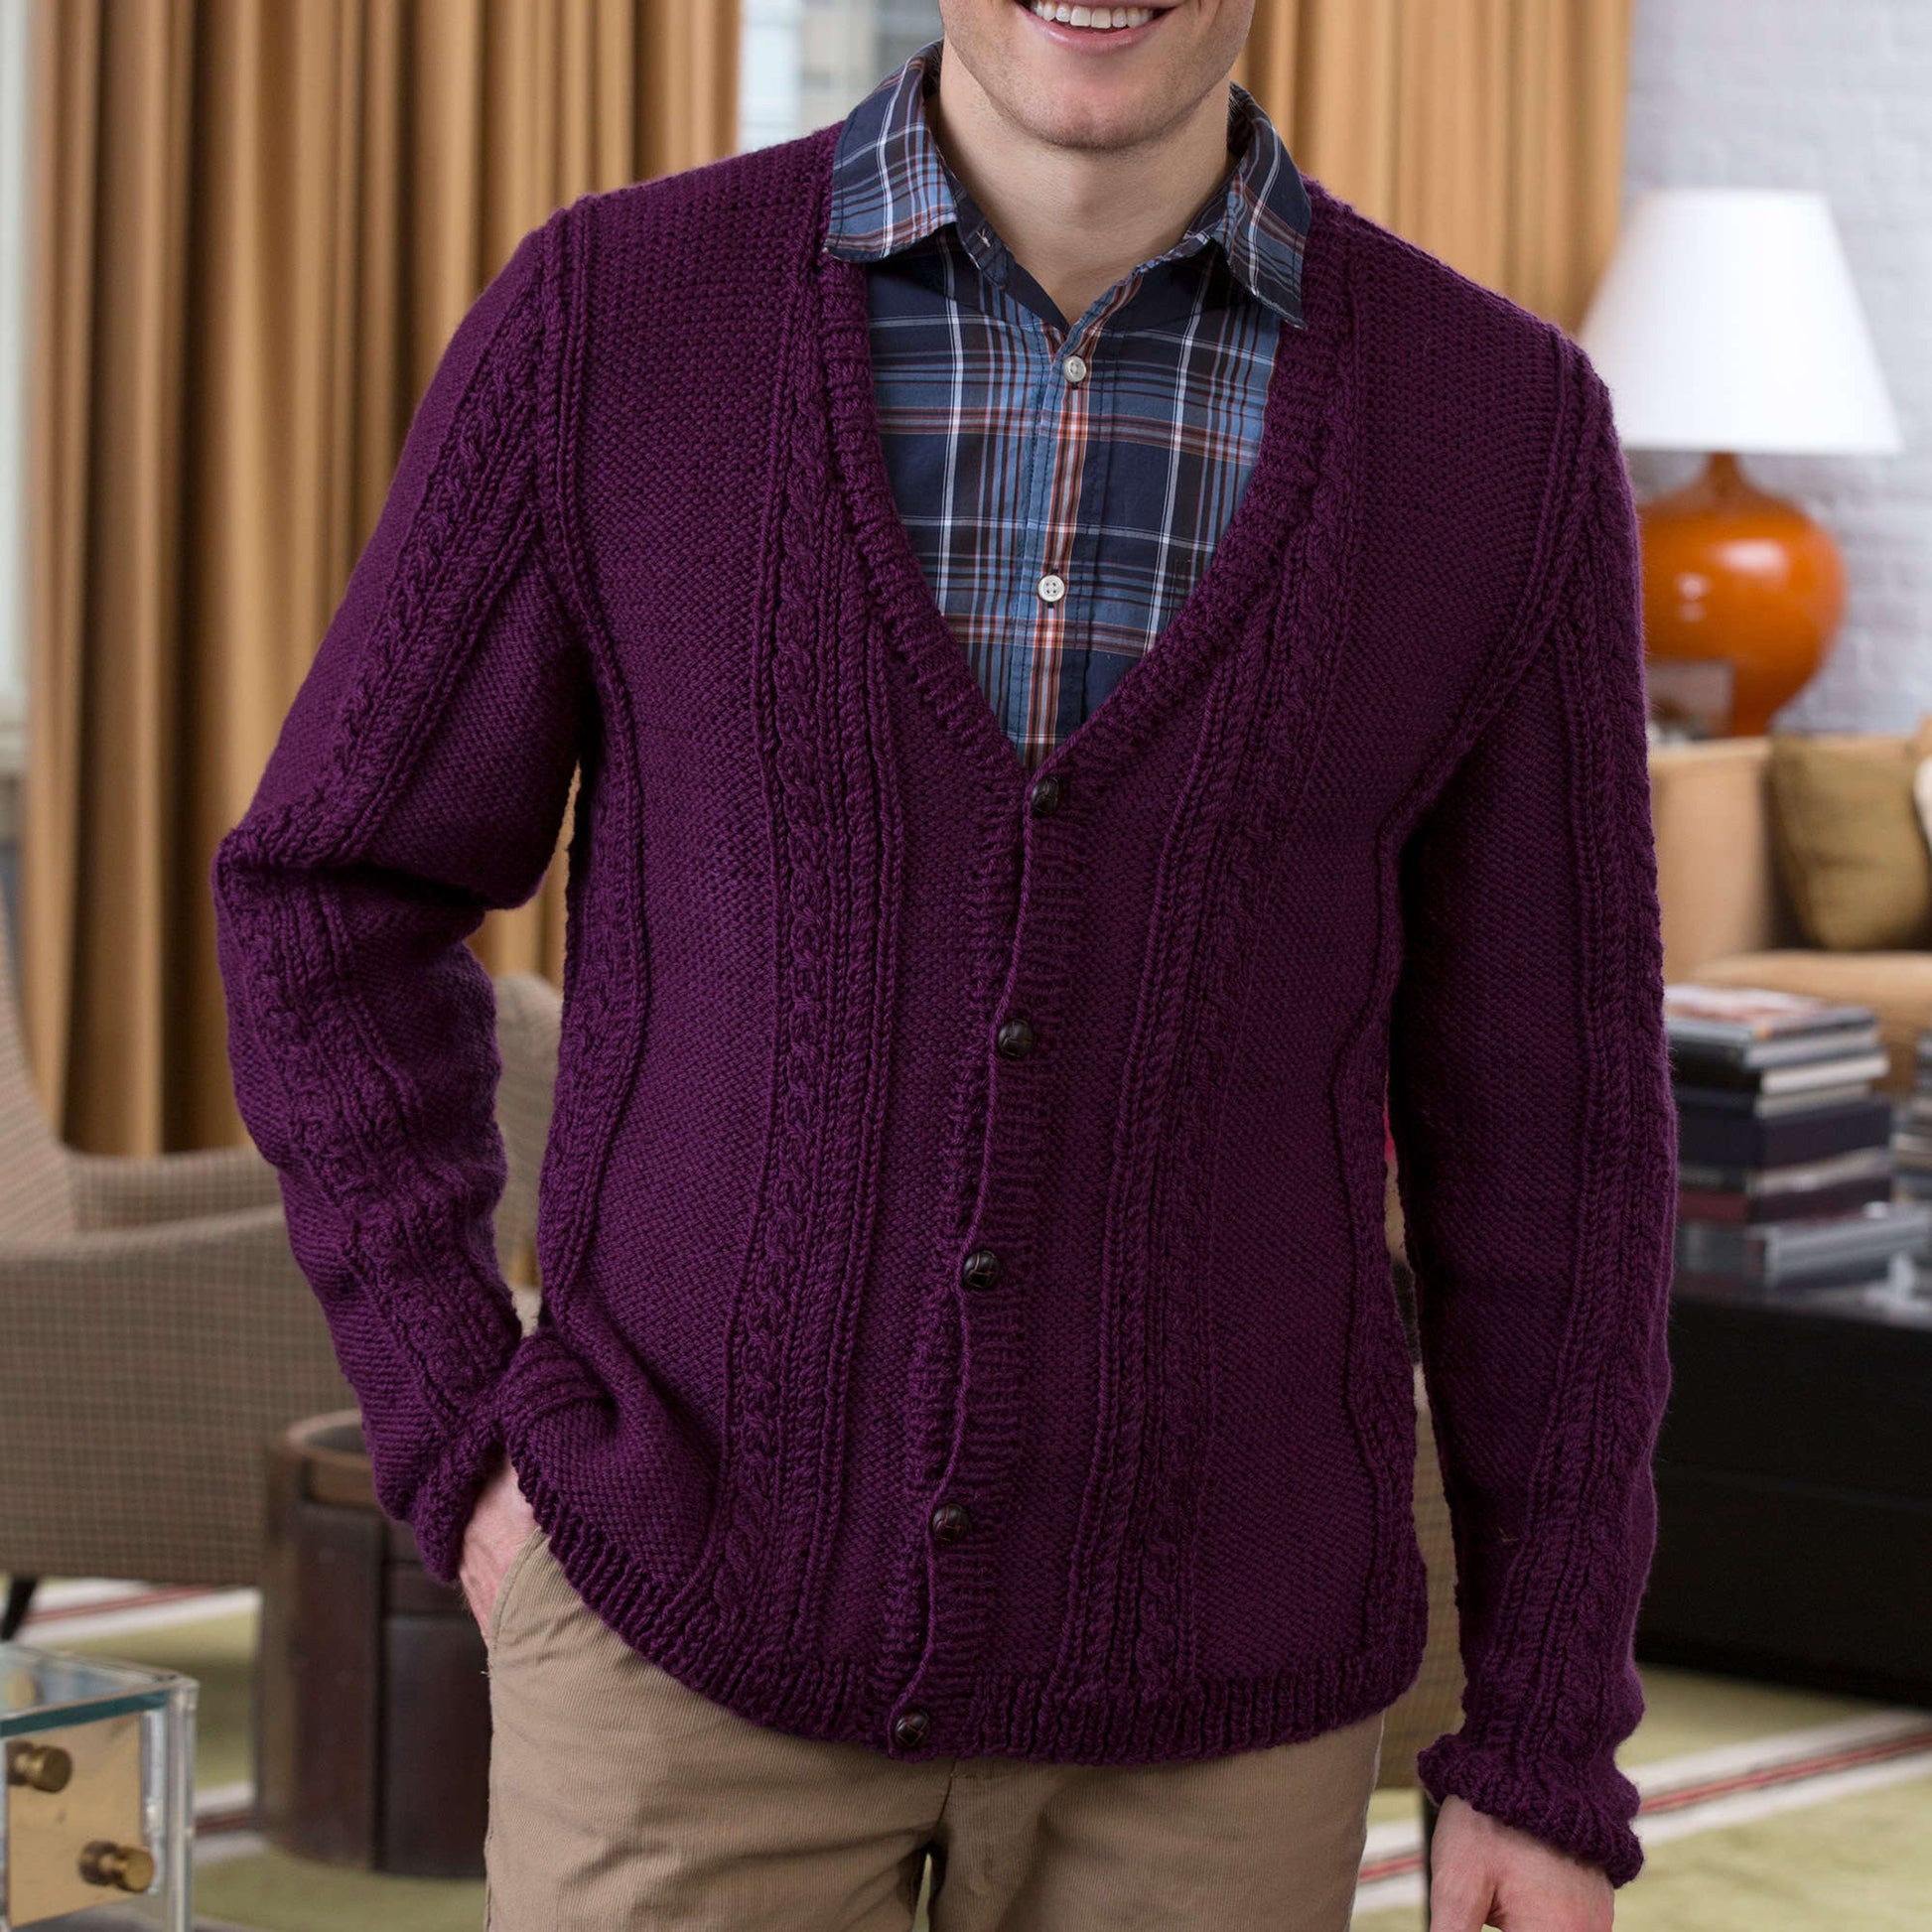 Free Red Heart Men's V-Neck Cable Knit Cardigan Pattern